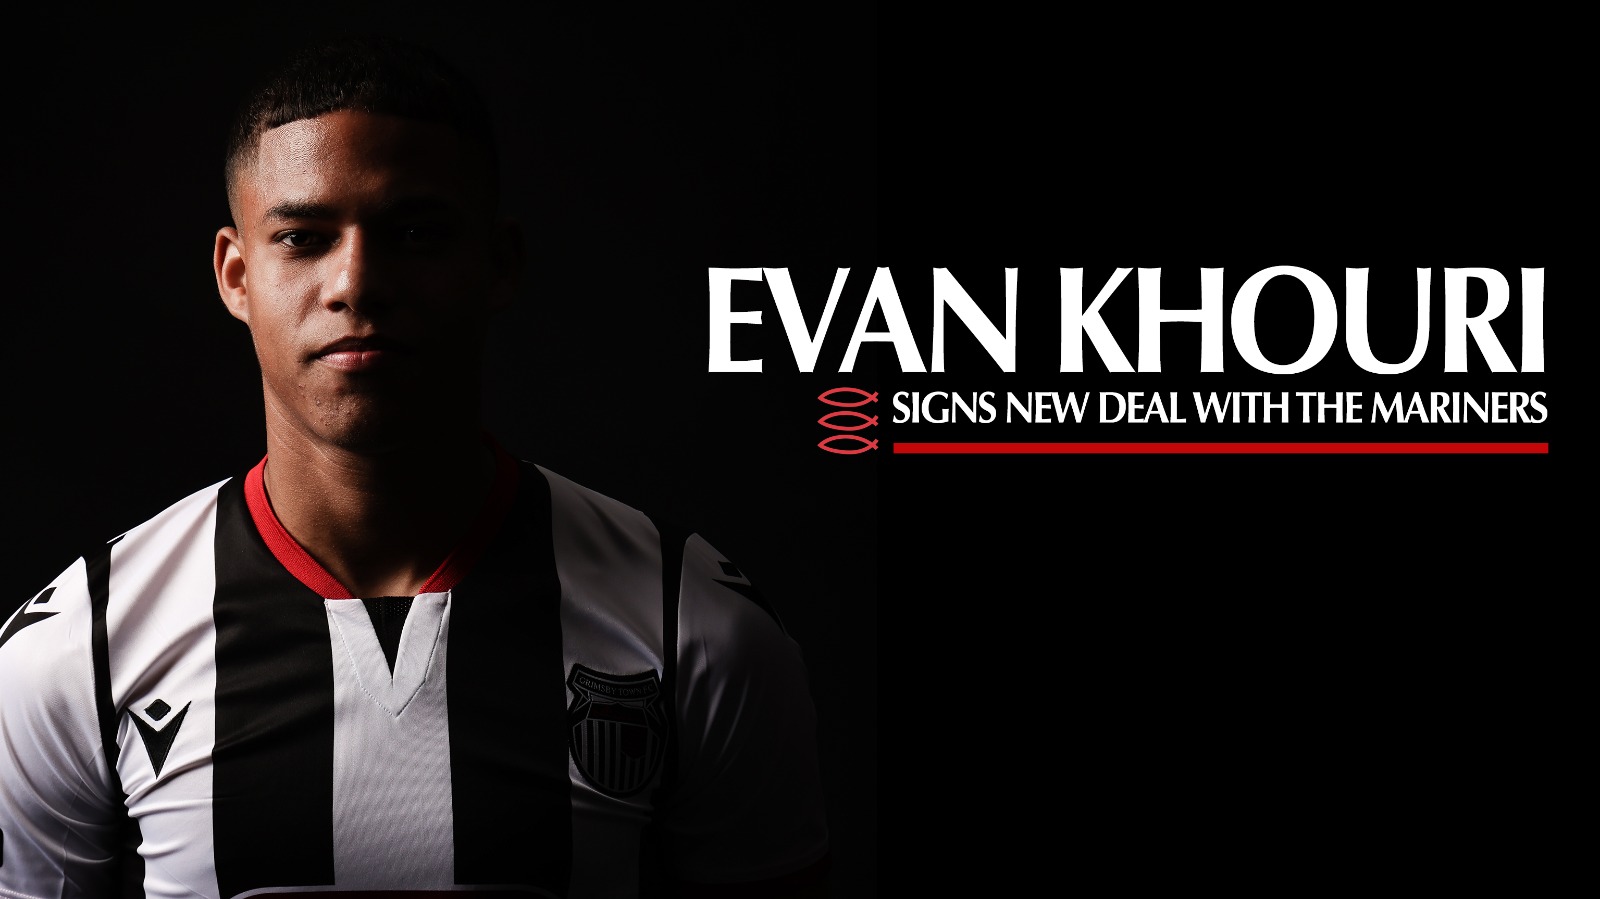 Khouri Signs a new deal banner